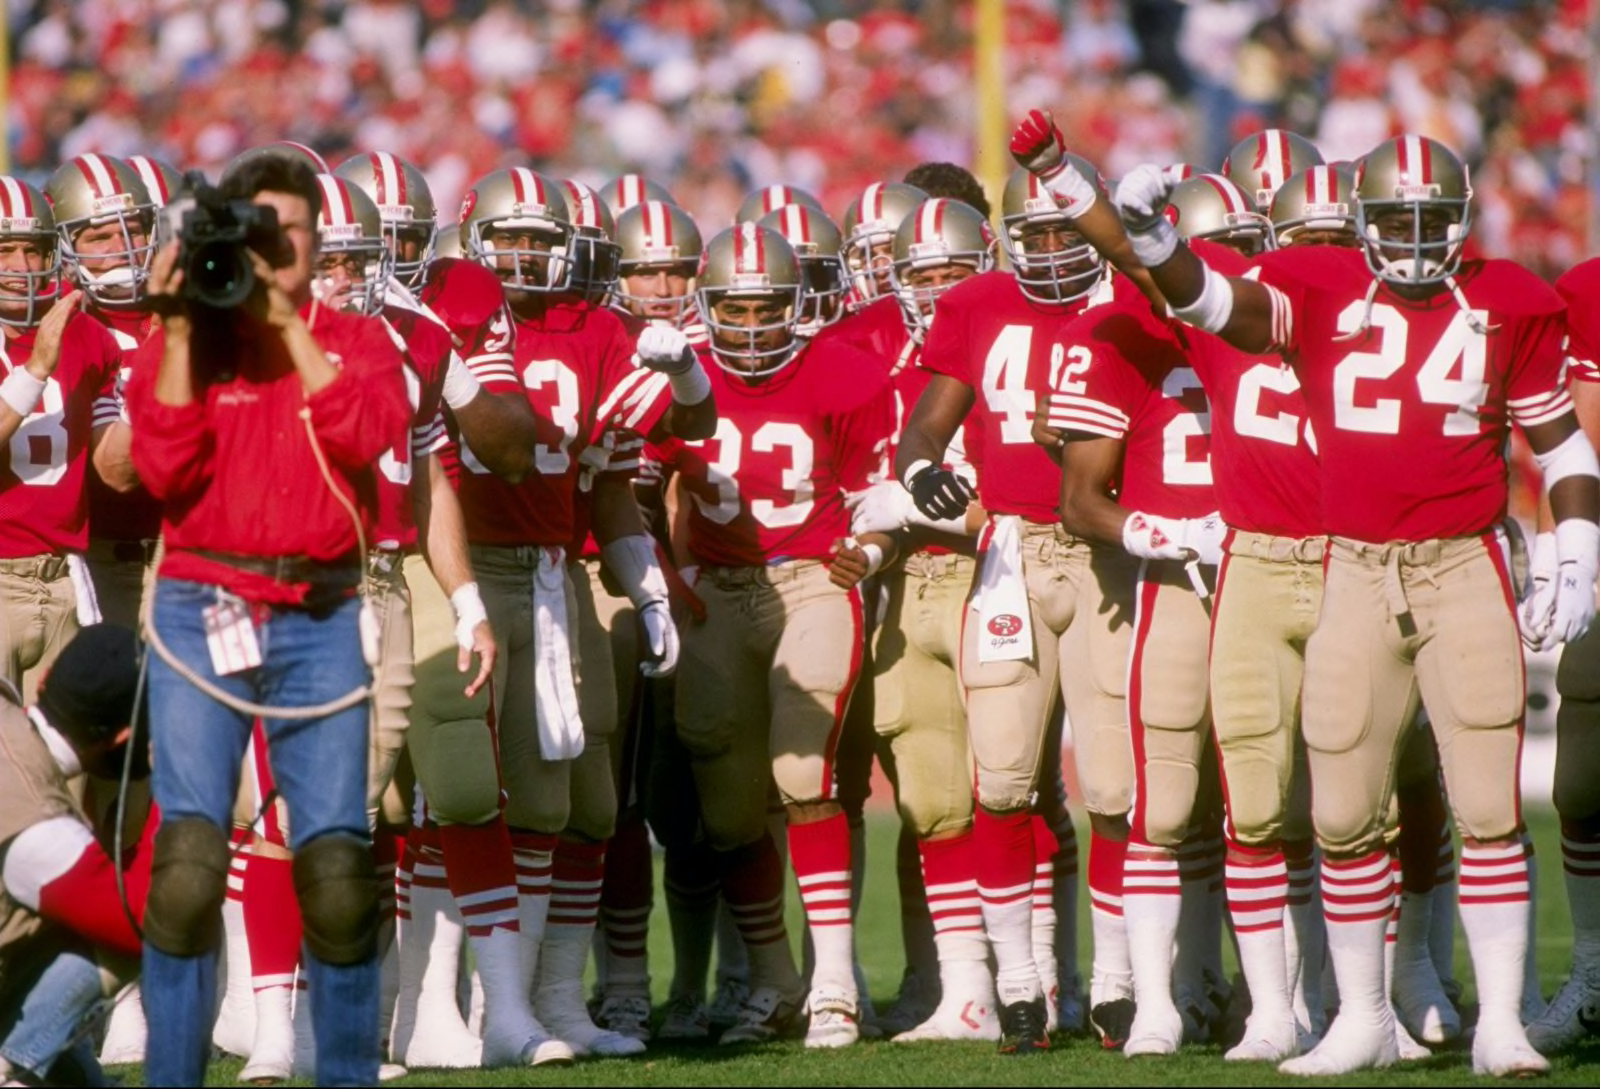 49ers 88 jersey